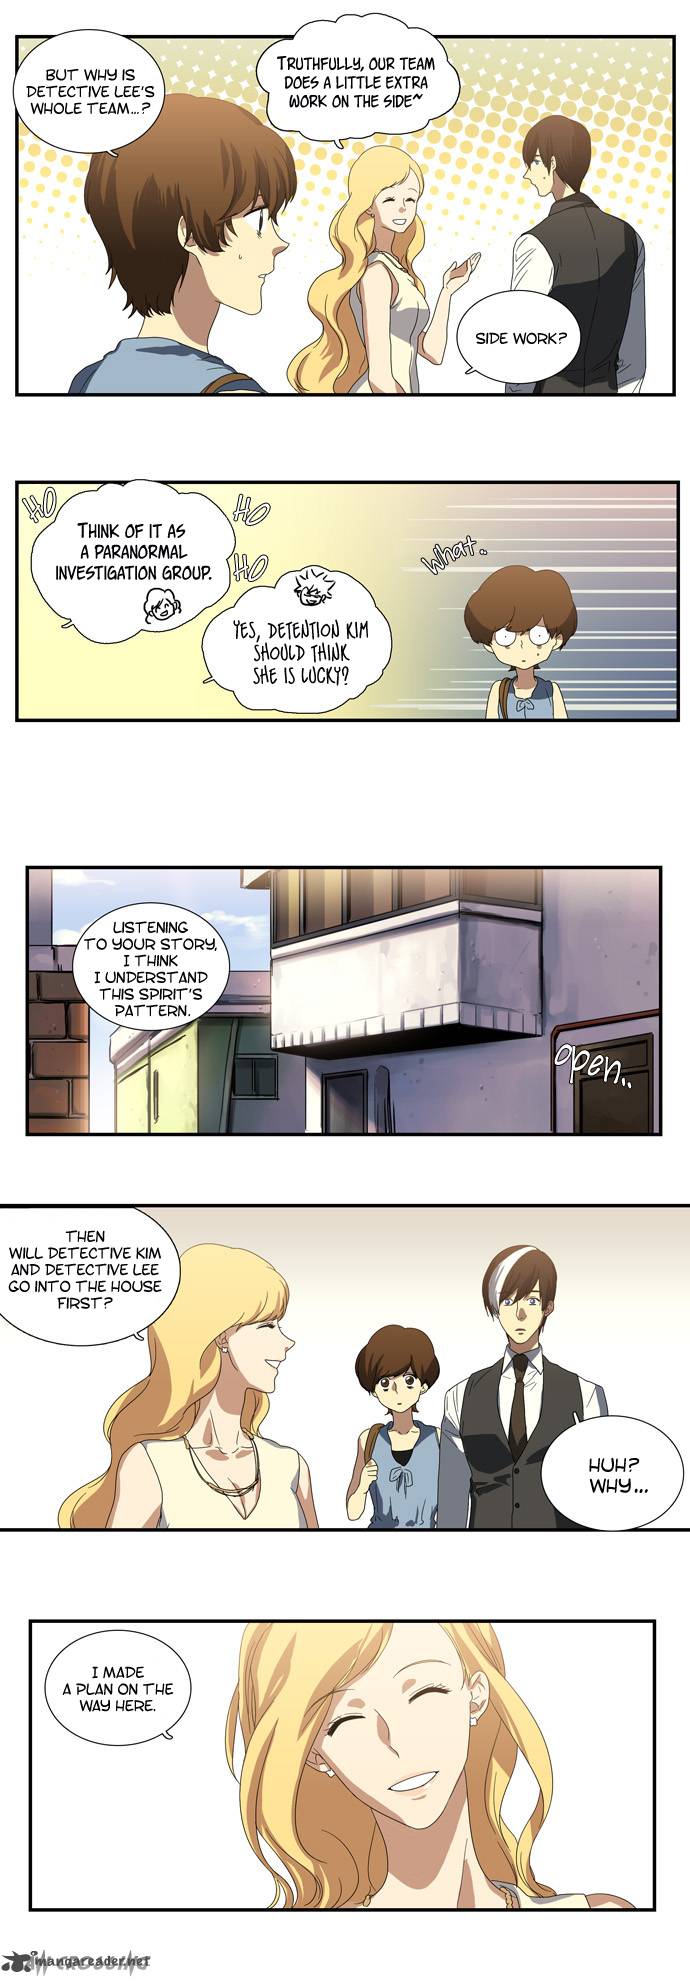 S I D Chapter 59 Page 4